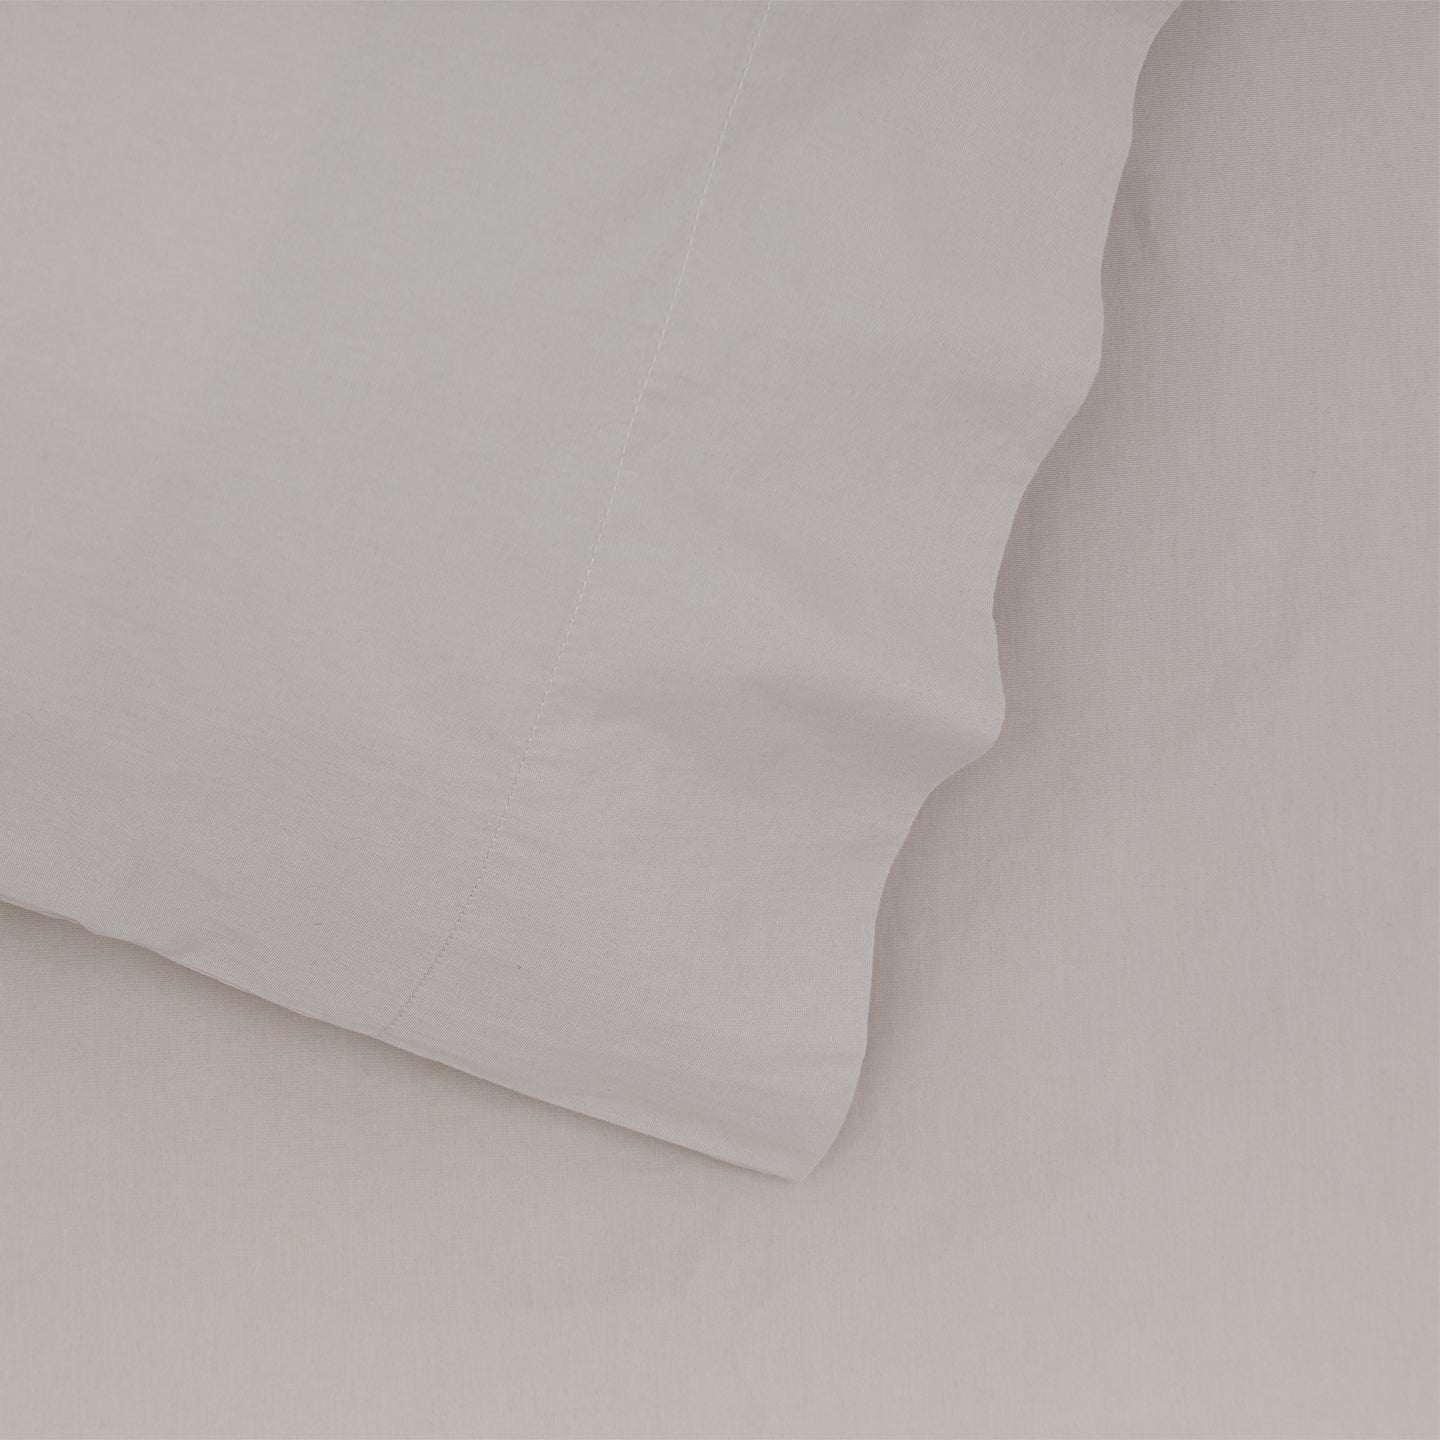 Essential Percale Pillowcases, Set of 2 - Light Grey